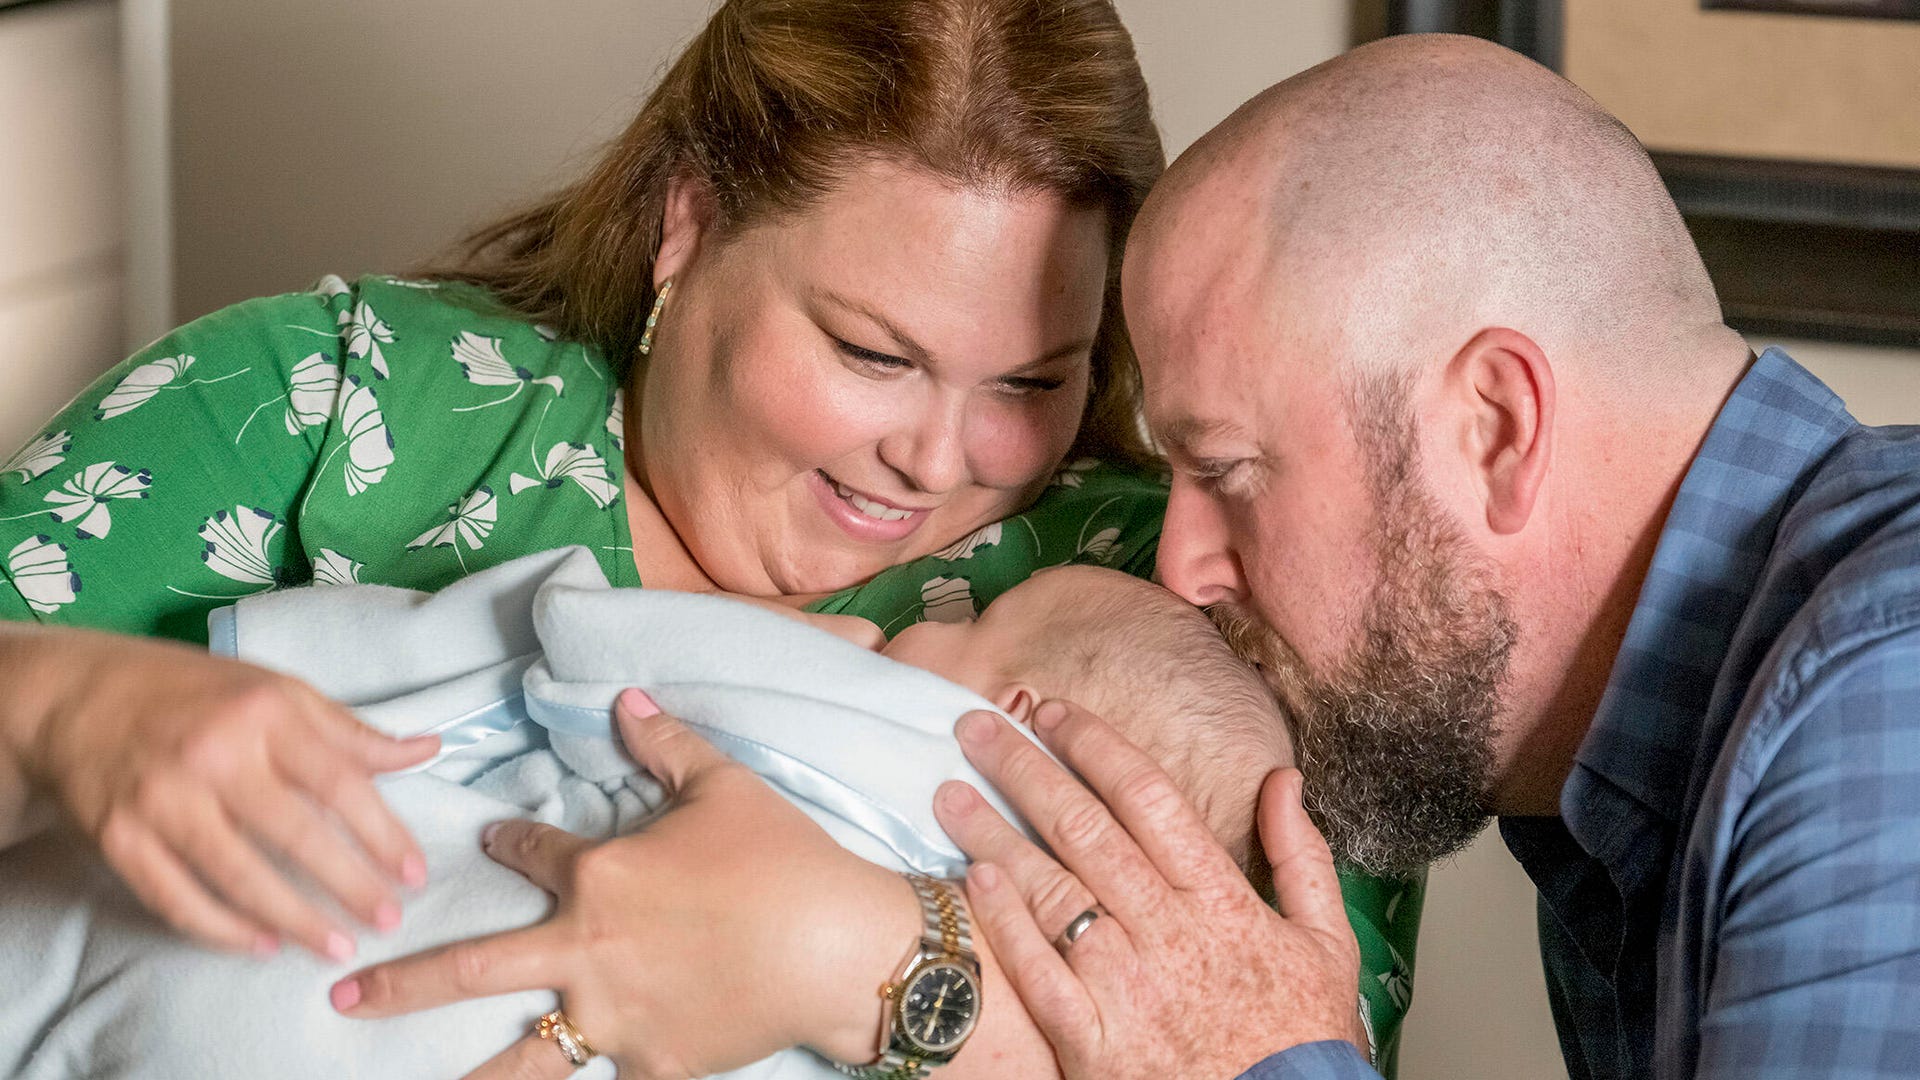 Chrissy Metz and Chris Sullivan, This Is Us​